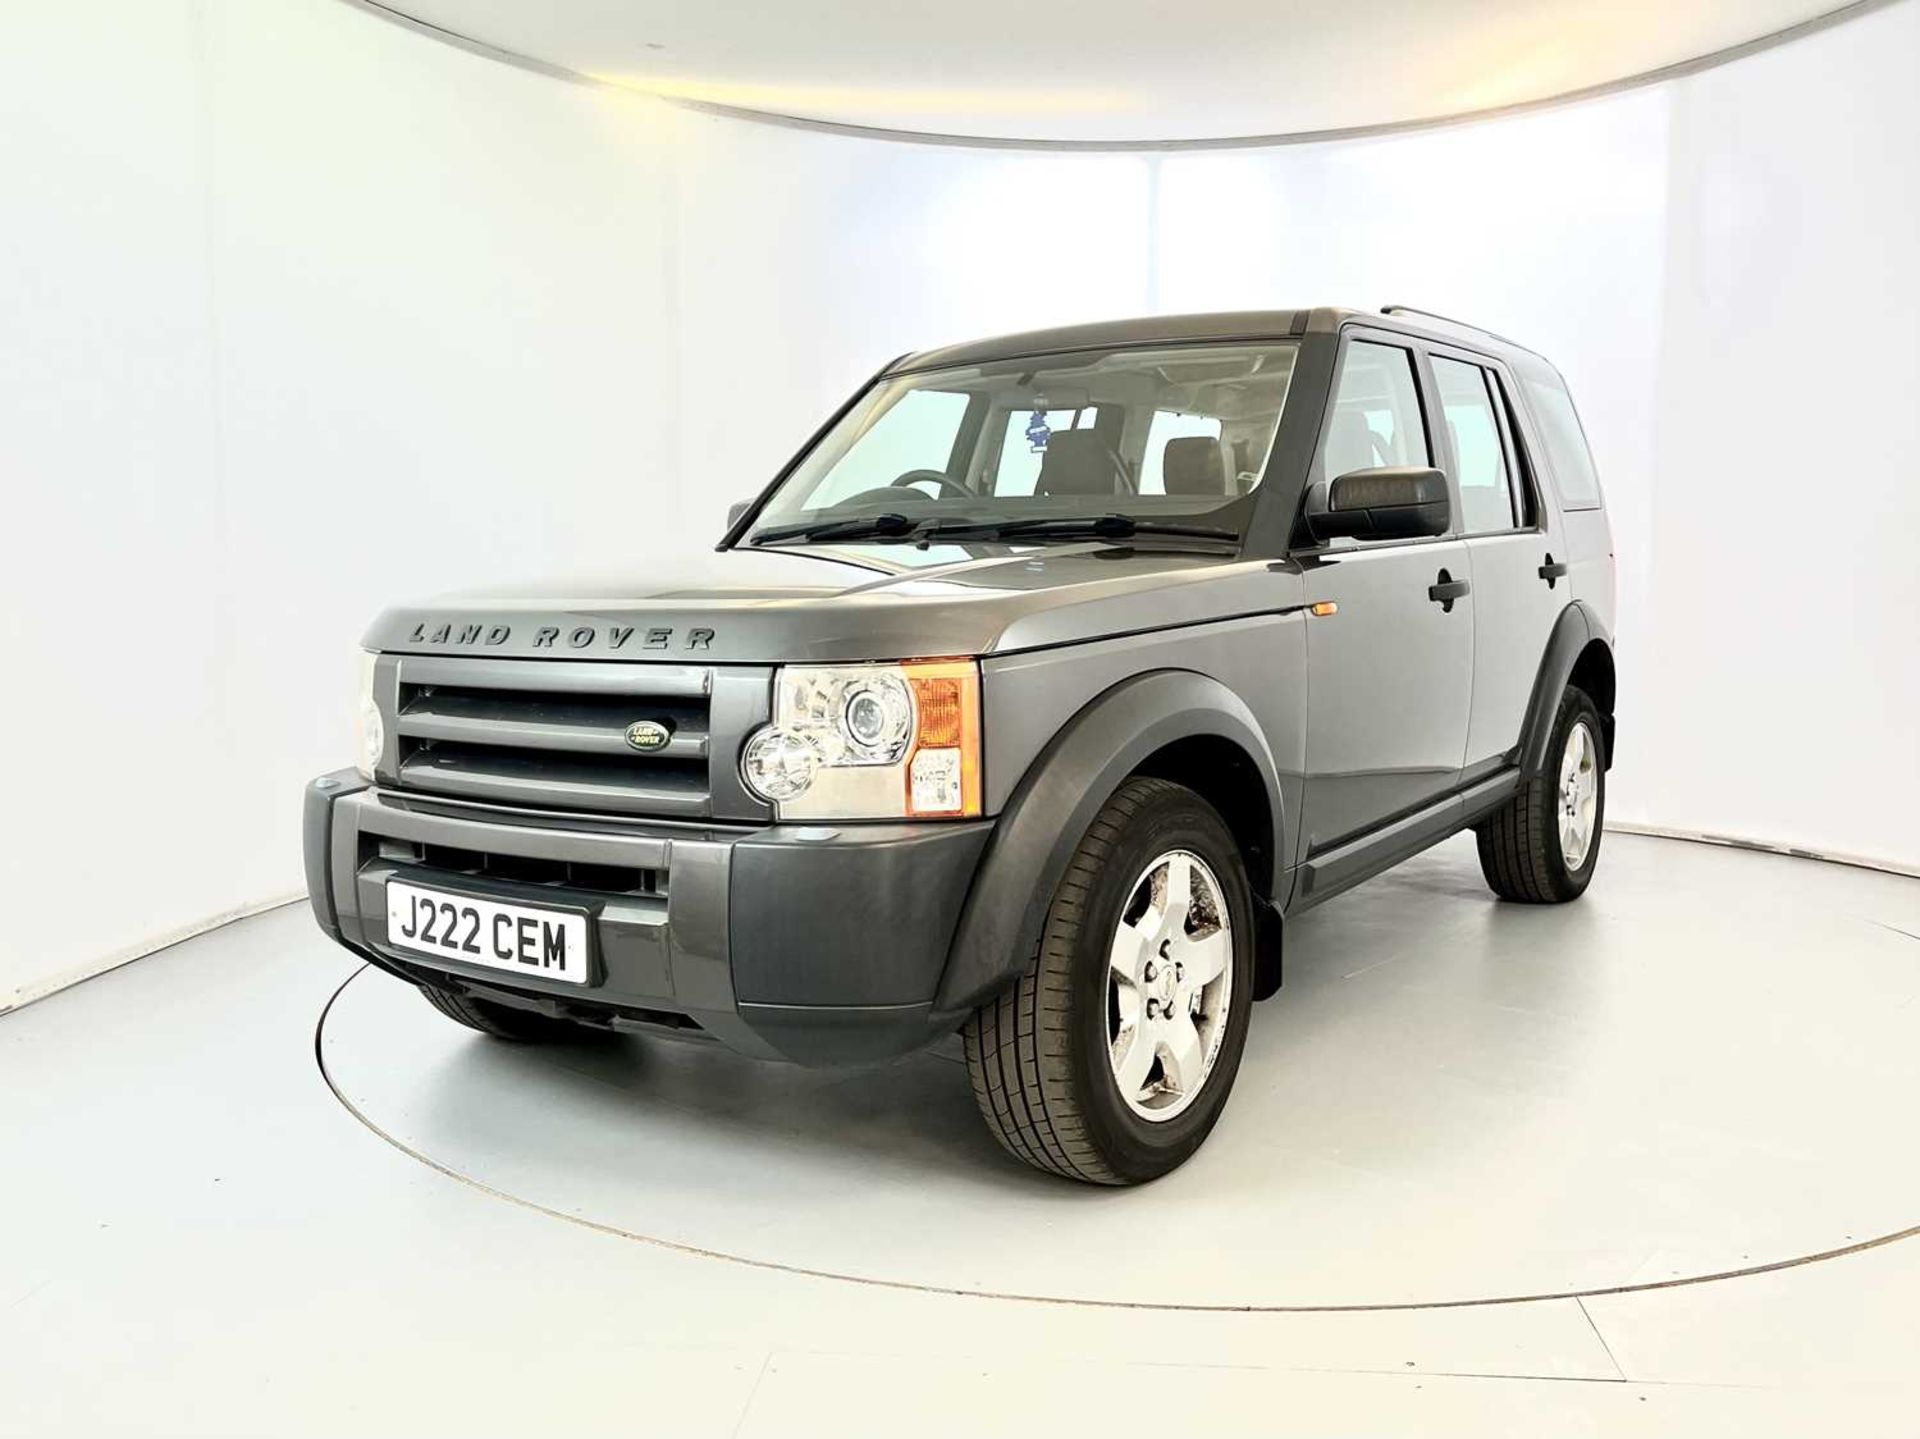 2005 Land Rover Discovery - Image 3 of 36